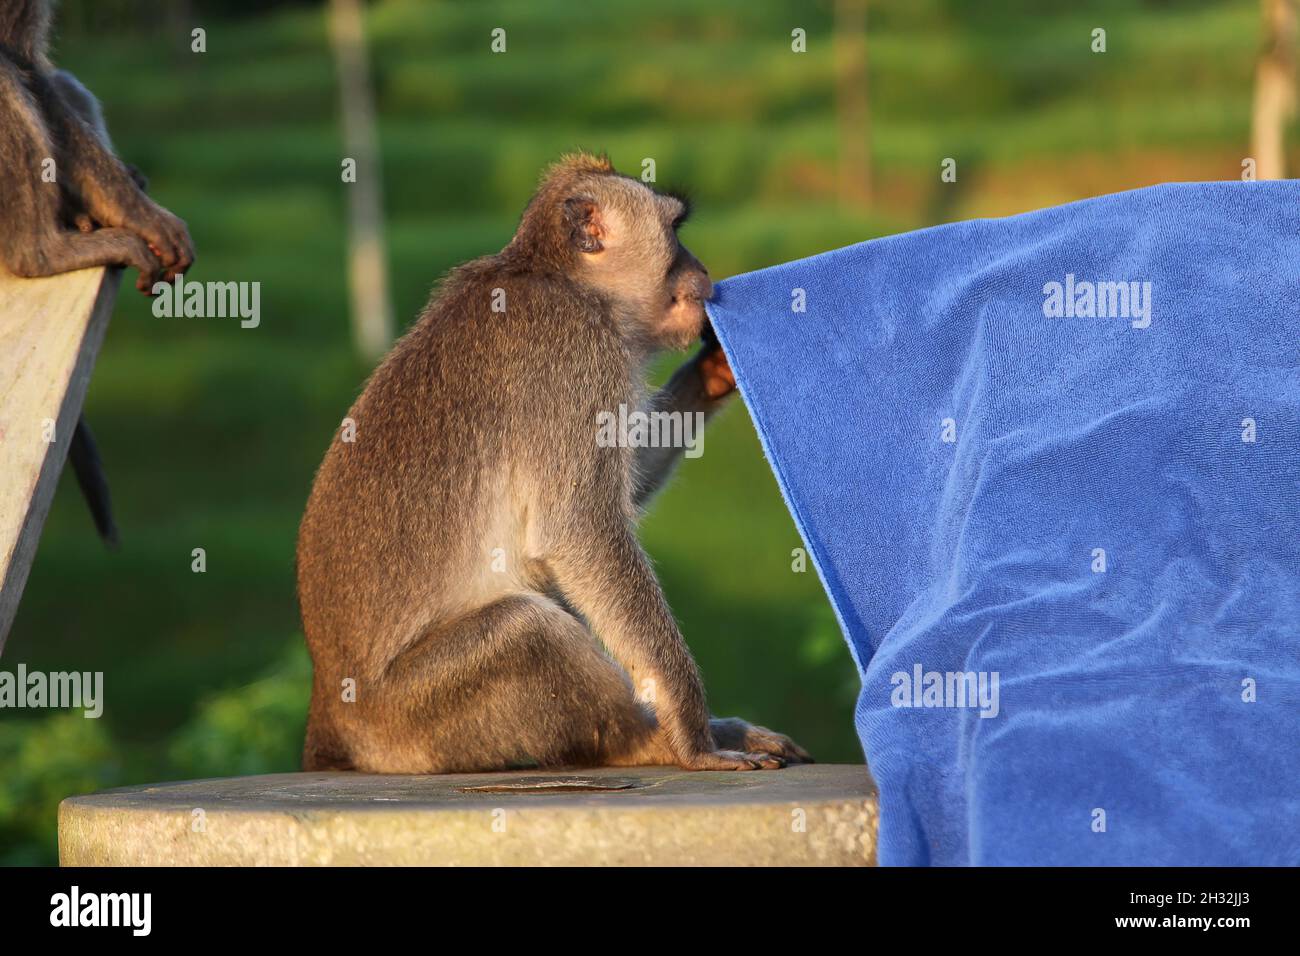 Funny curious monkey eating the blue towel in Bali, Indonesia Stock Photo